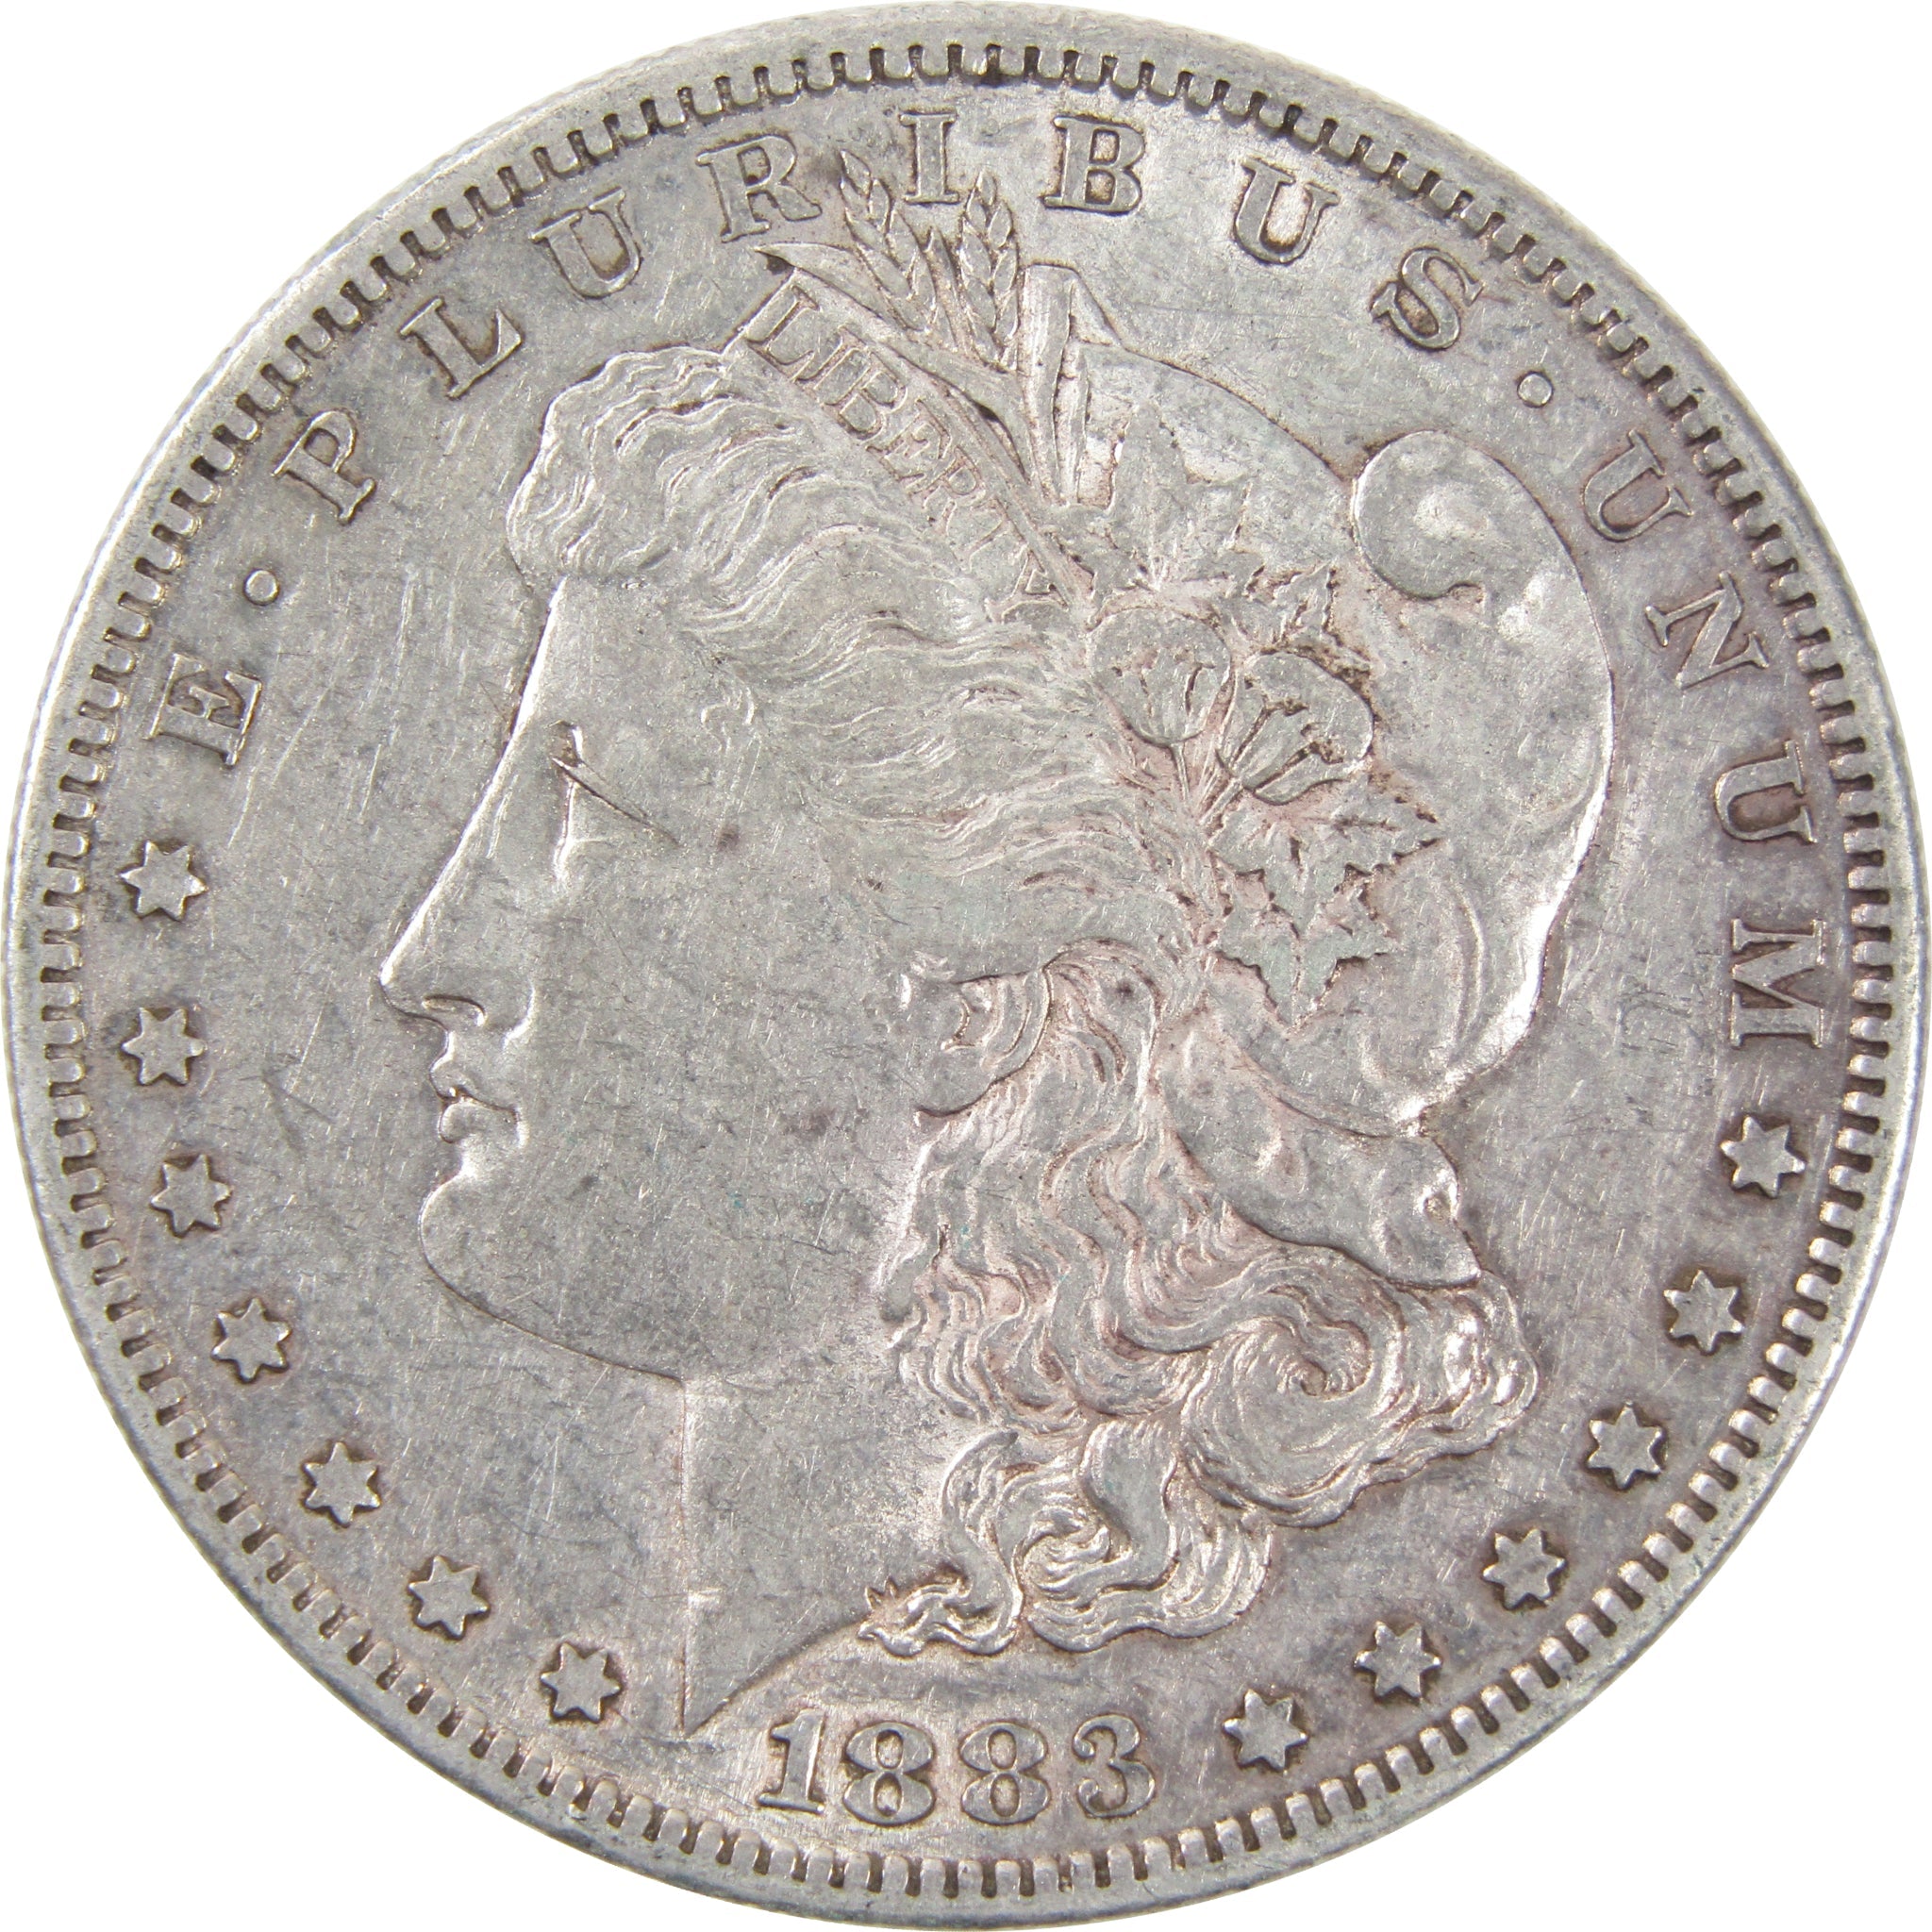 1883 S Morgan Dollar XF EF Extremely Fine 90% Silver Coin SKU:I2465 - Morgan coin - Morgan silver dollar - Morgan silver dollar for sale - Profile Coins &amp; Collectibles